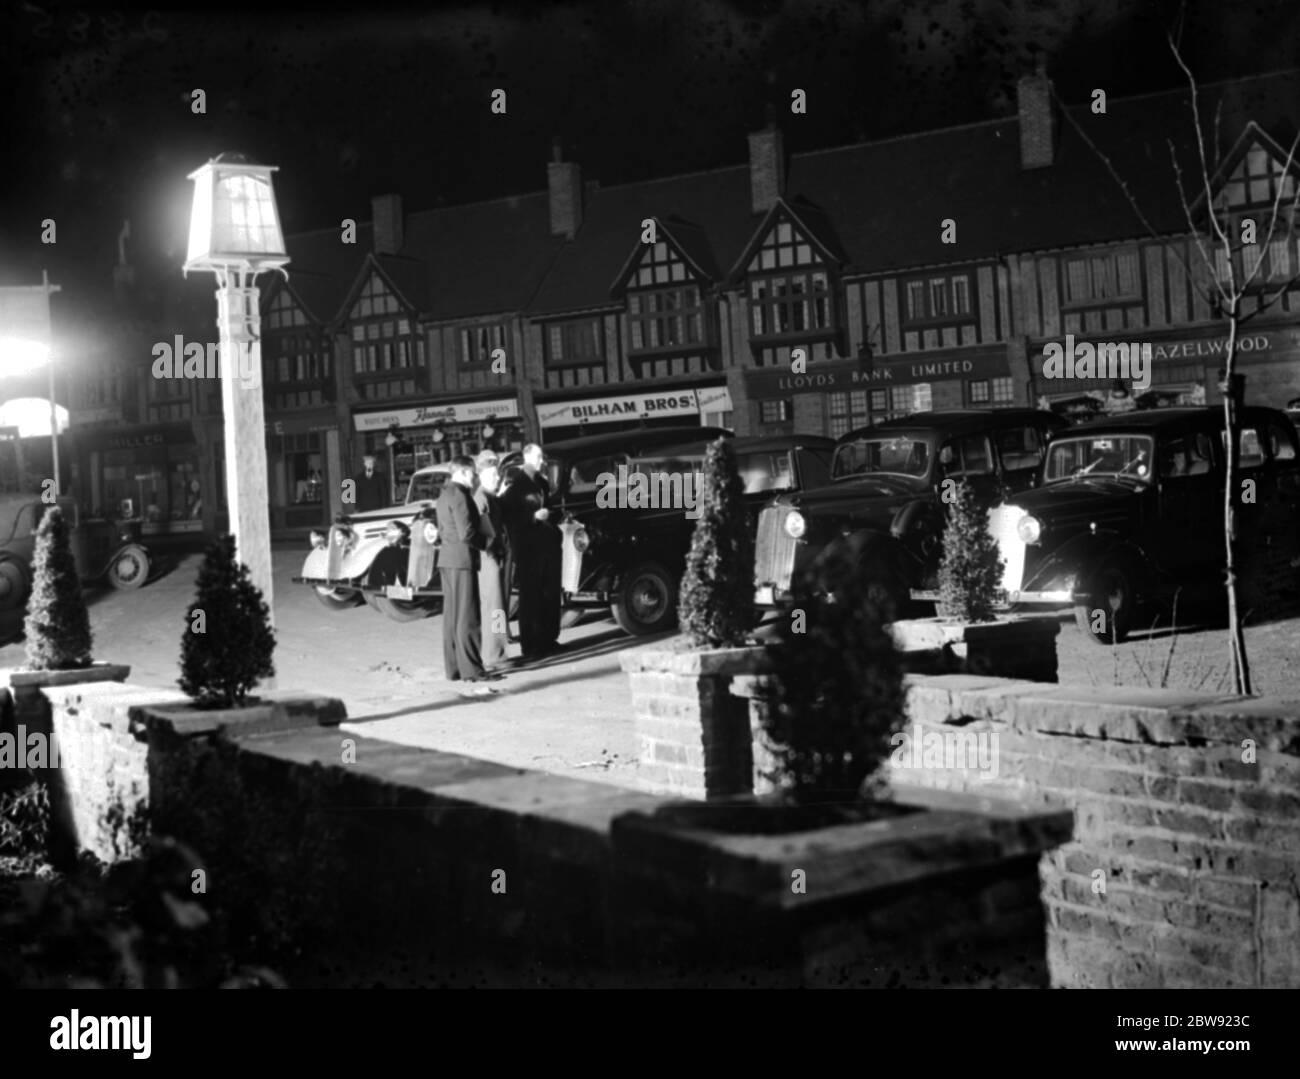 A fleet of vauxhall cars parked together at the Daylight Inn in Pettswood . 1936 Stock Photo